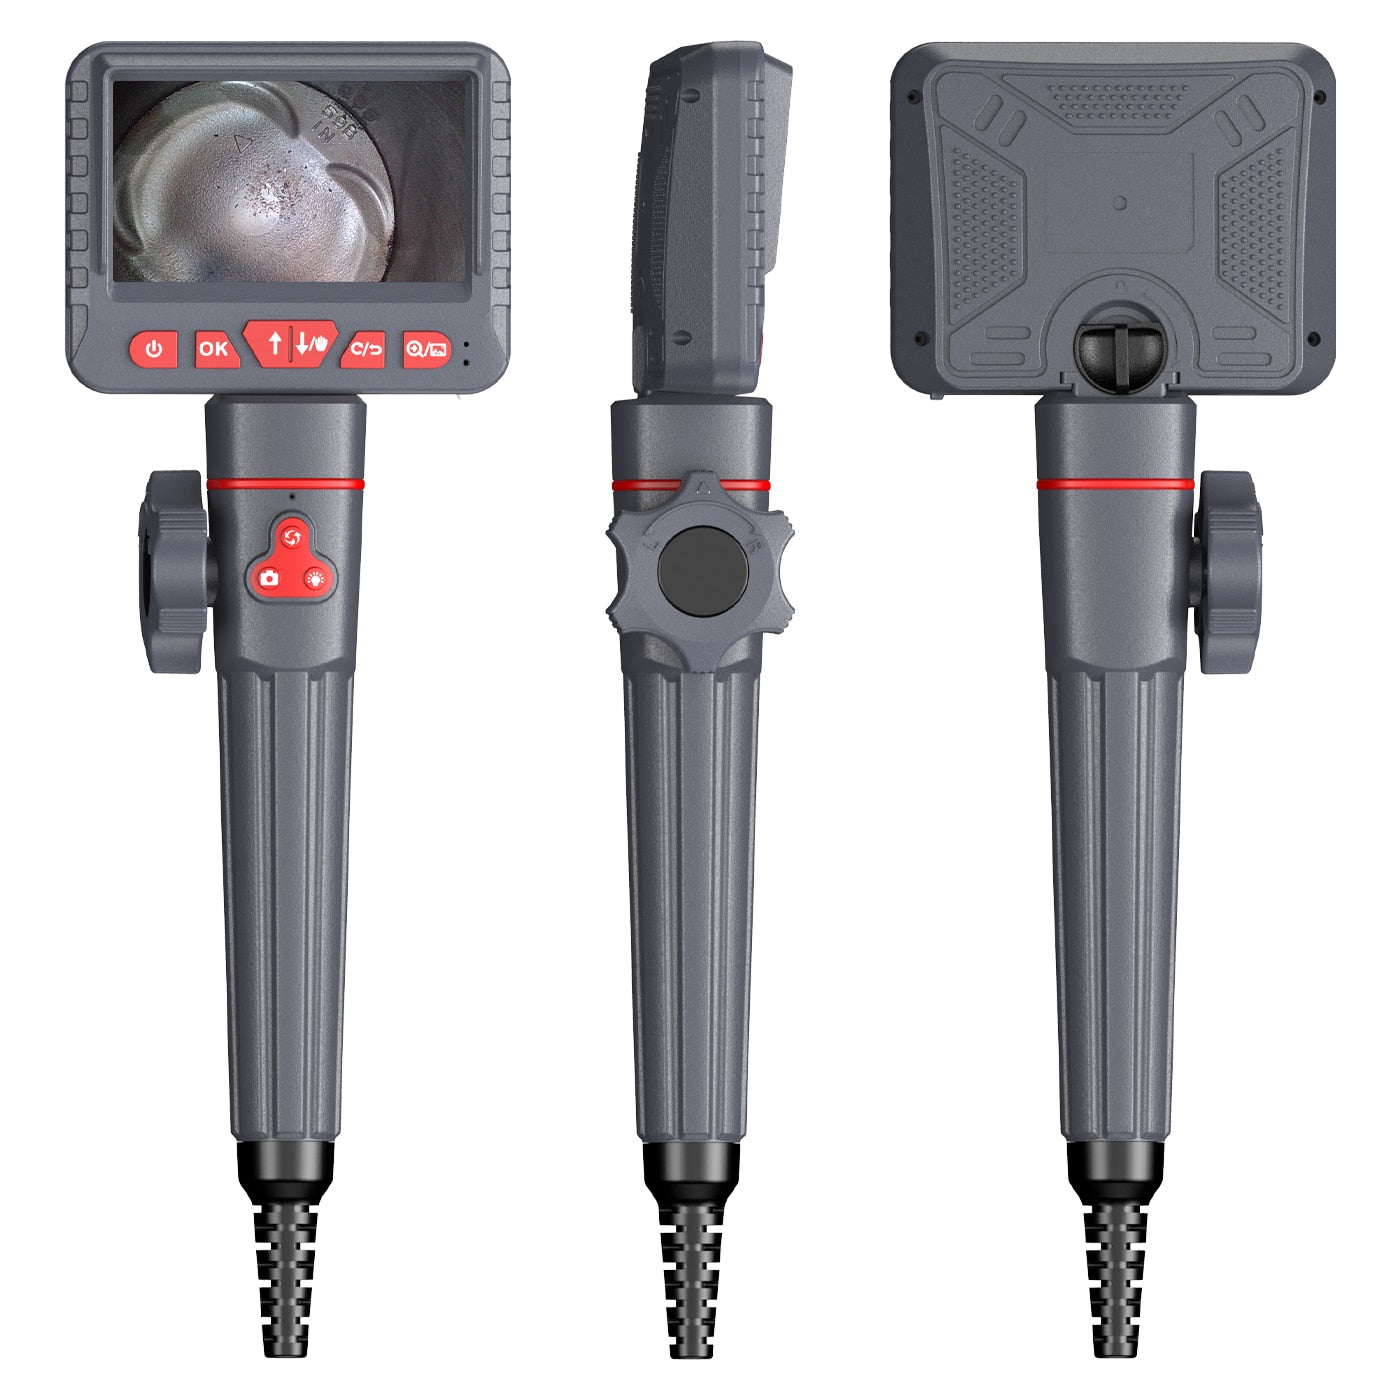 Borescope Inspection Camera - 4.3" Screen with 2 Way 180 Degree 6mm or 8mm waterproof probe